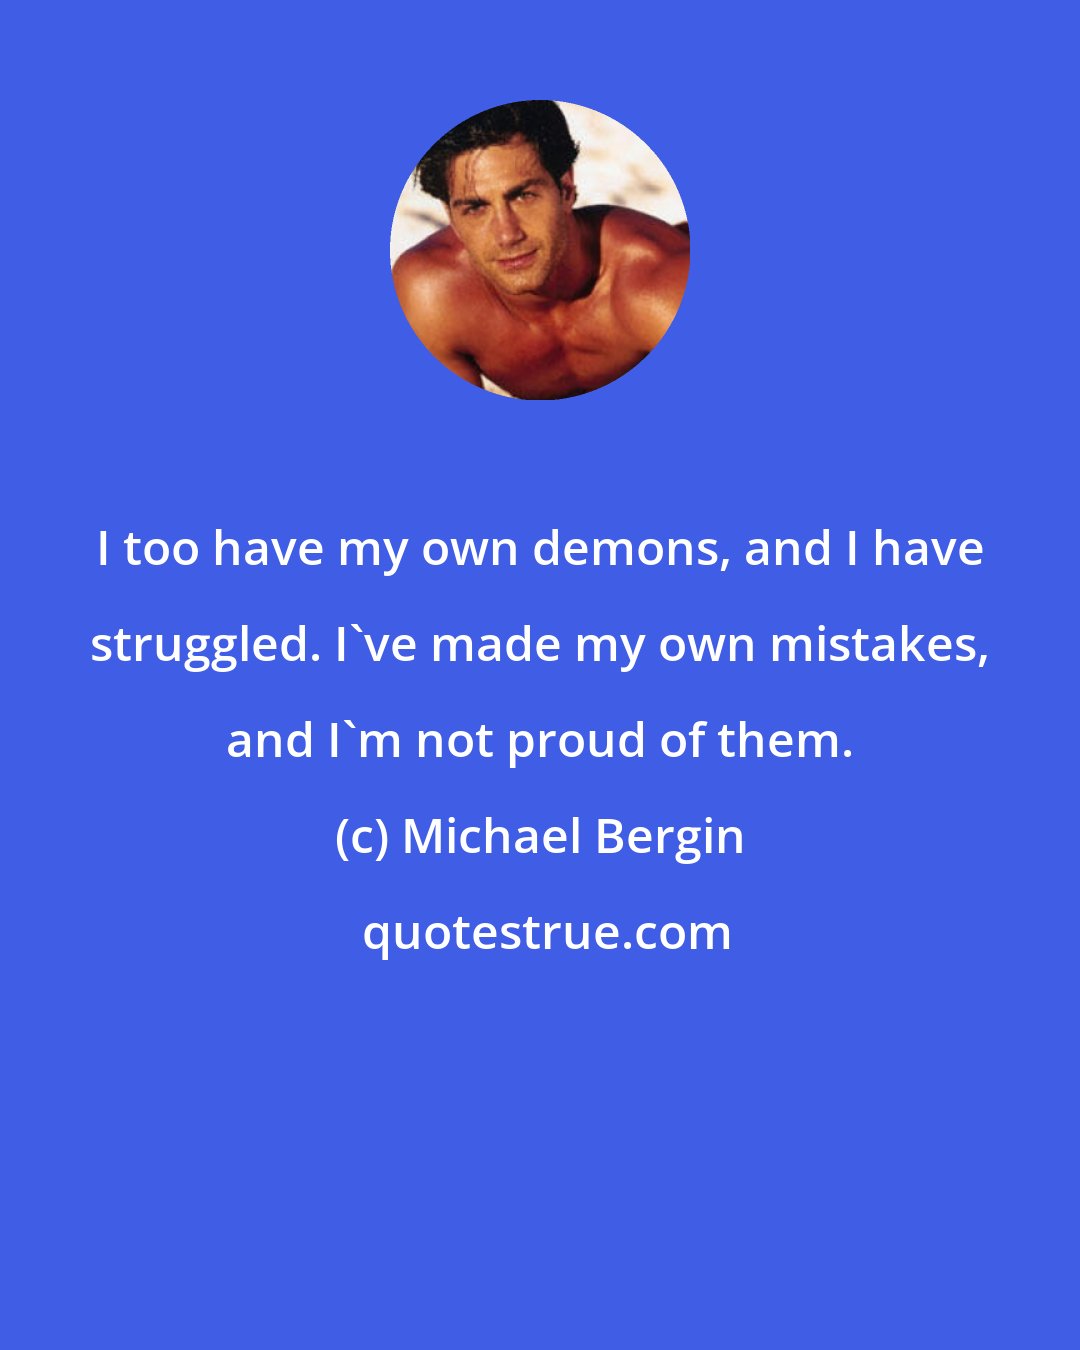 Michael Bergin: I too have my own demons, and I have struggled. I've made my own mistakes, and I'm not proud of them.